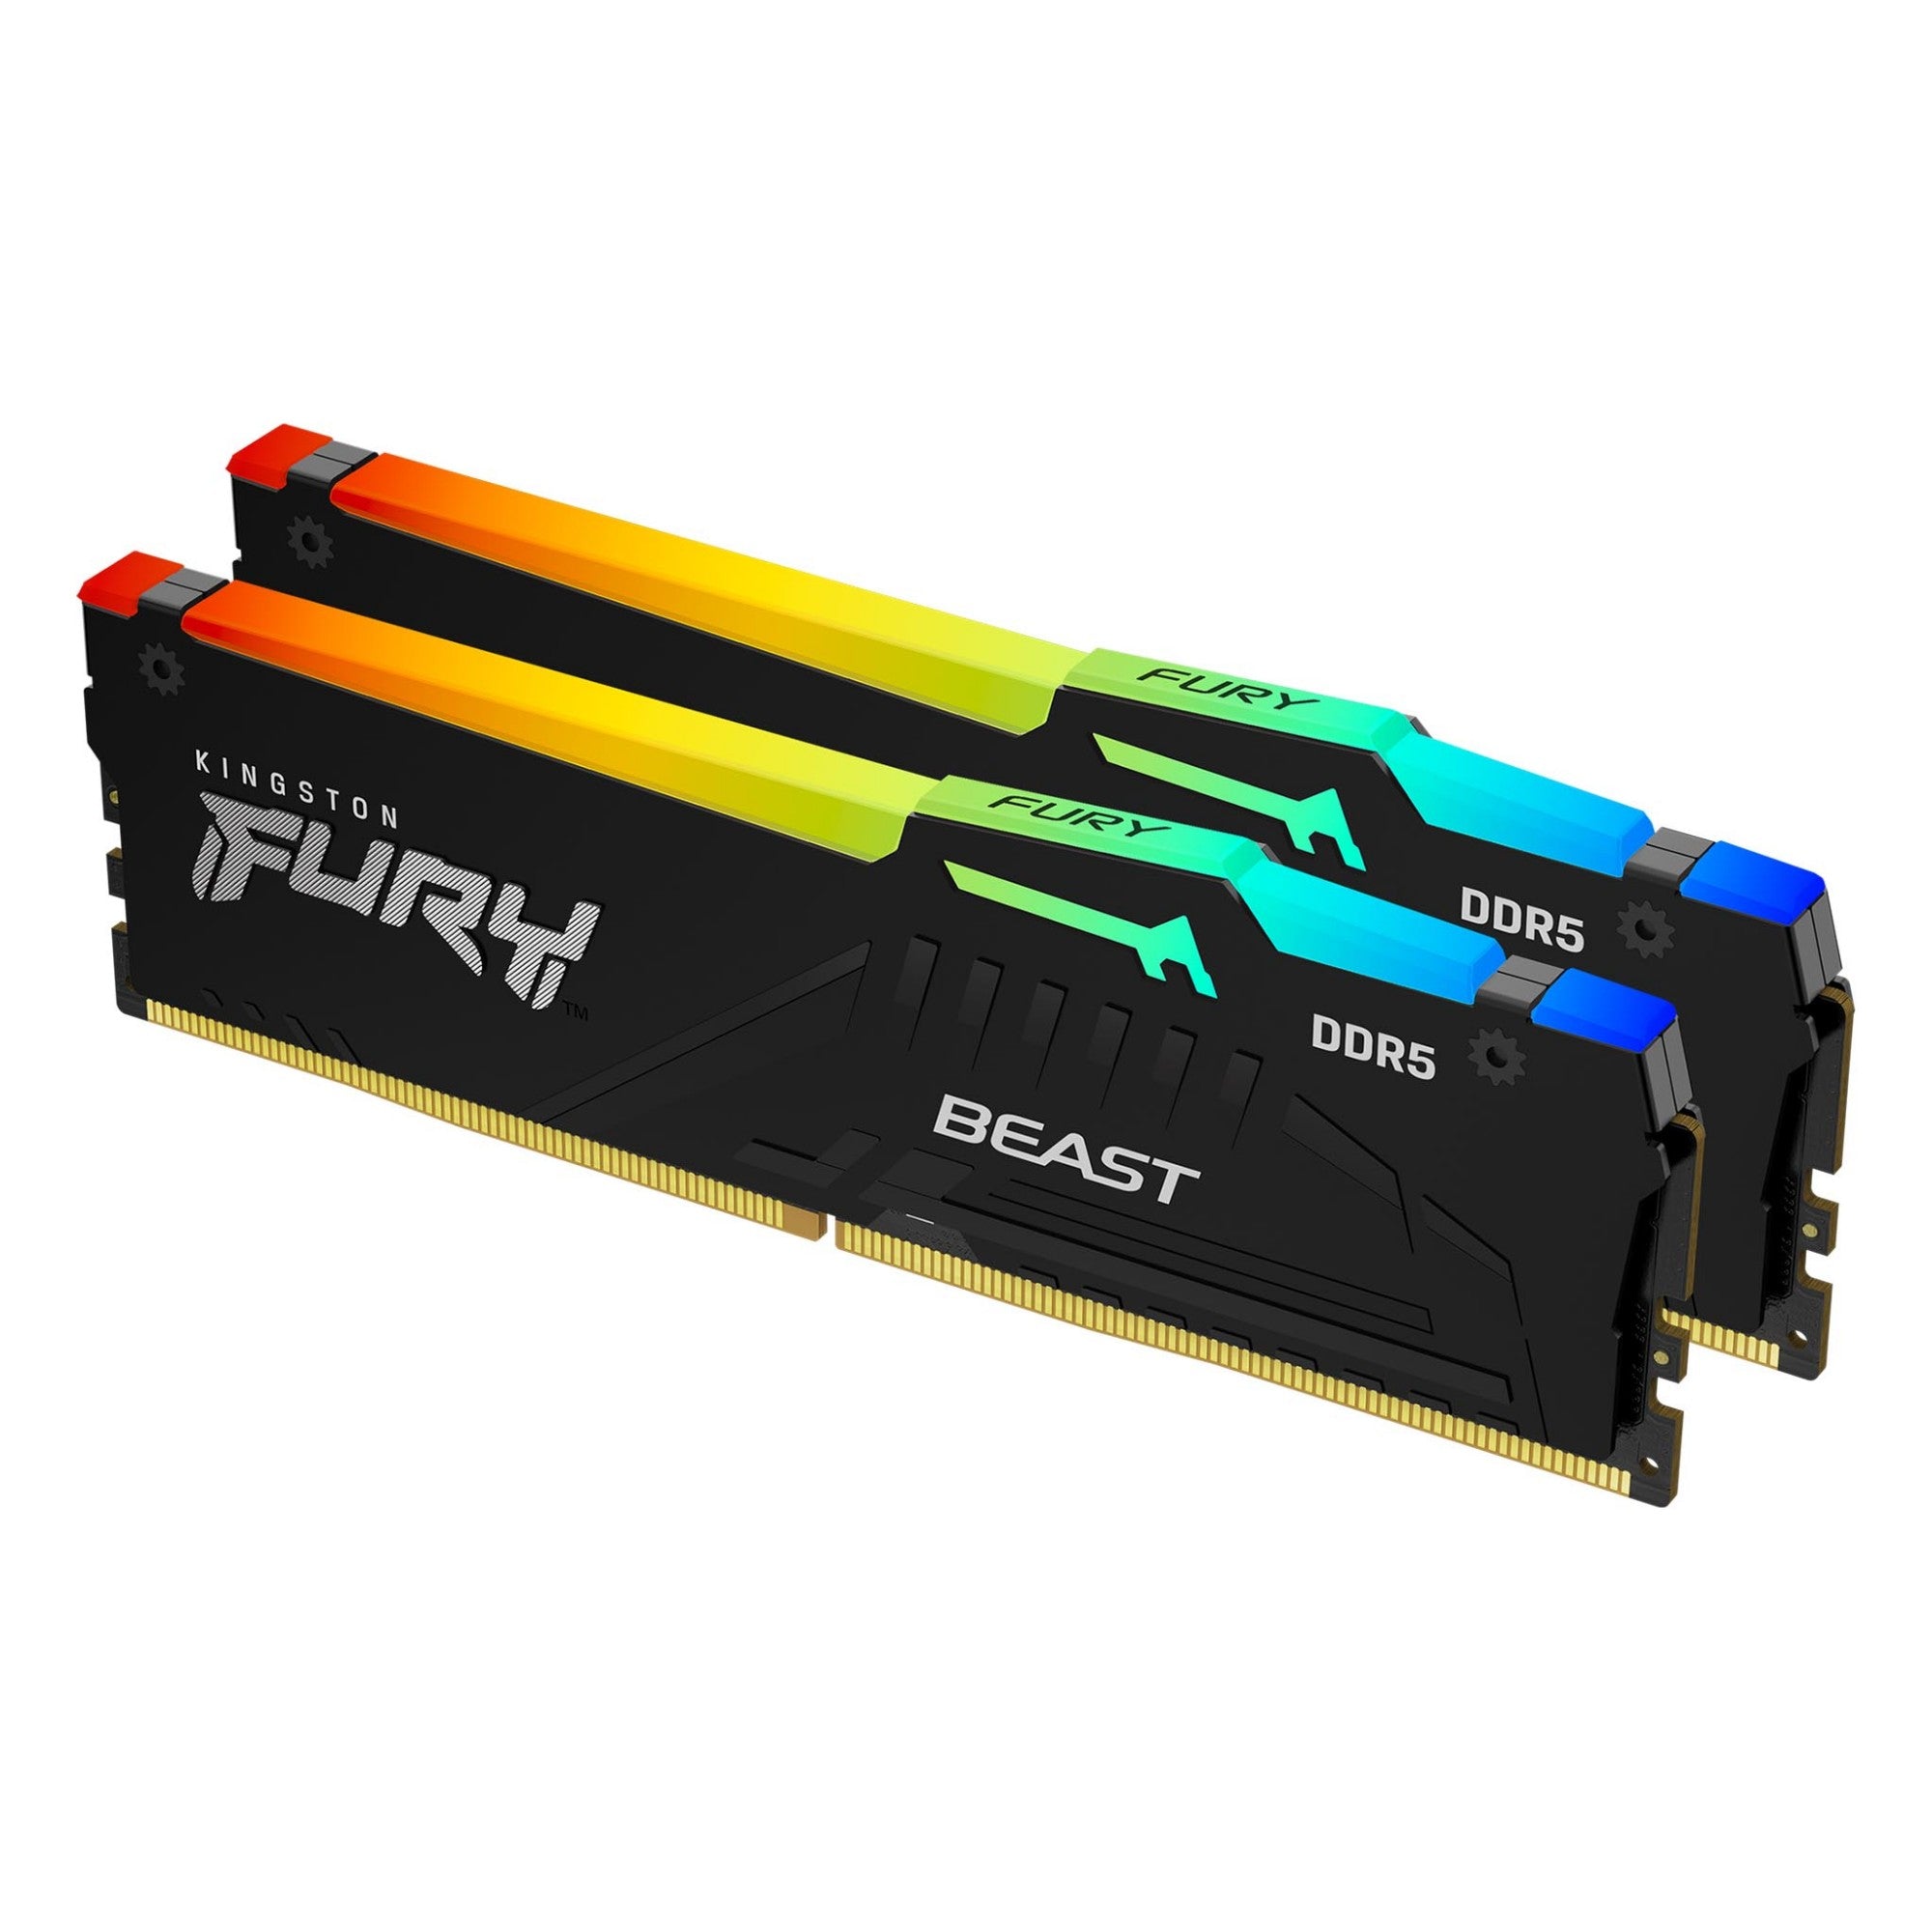 Kingston Technology FURY Beast 64GB 5600MT/s DDR5 CL36 DIMM (Kit of 2) RGB EXPO